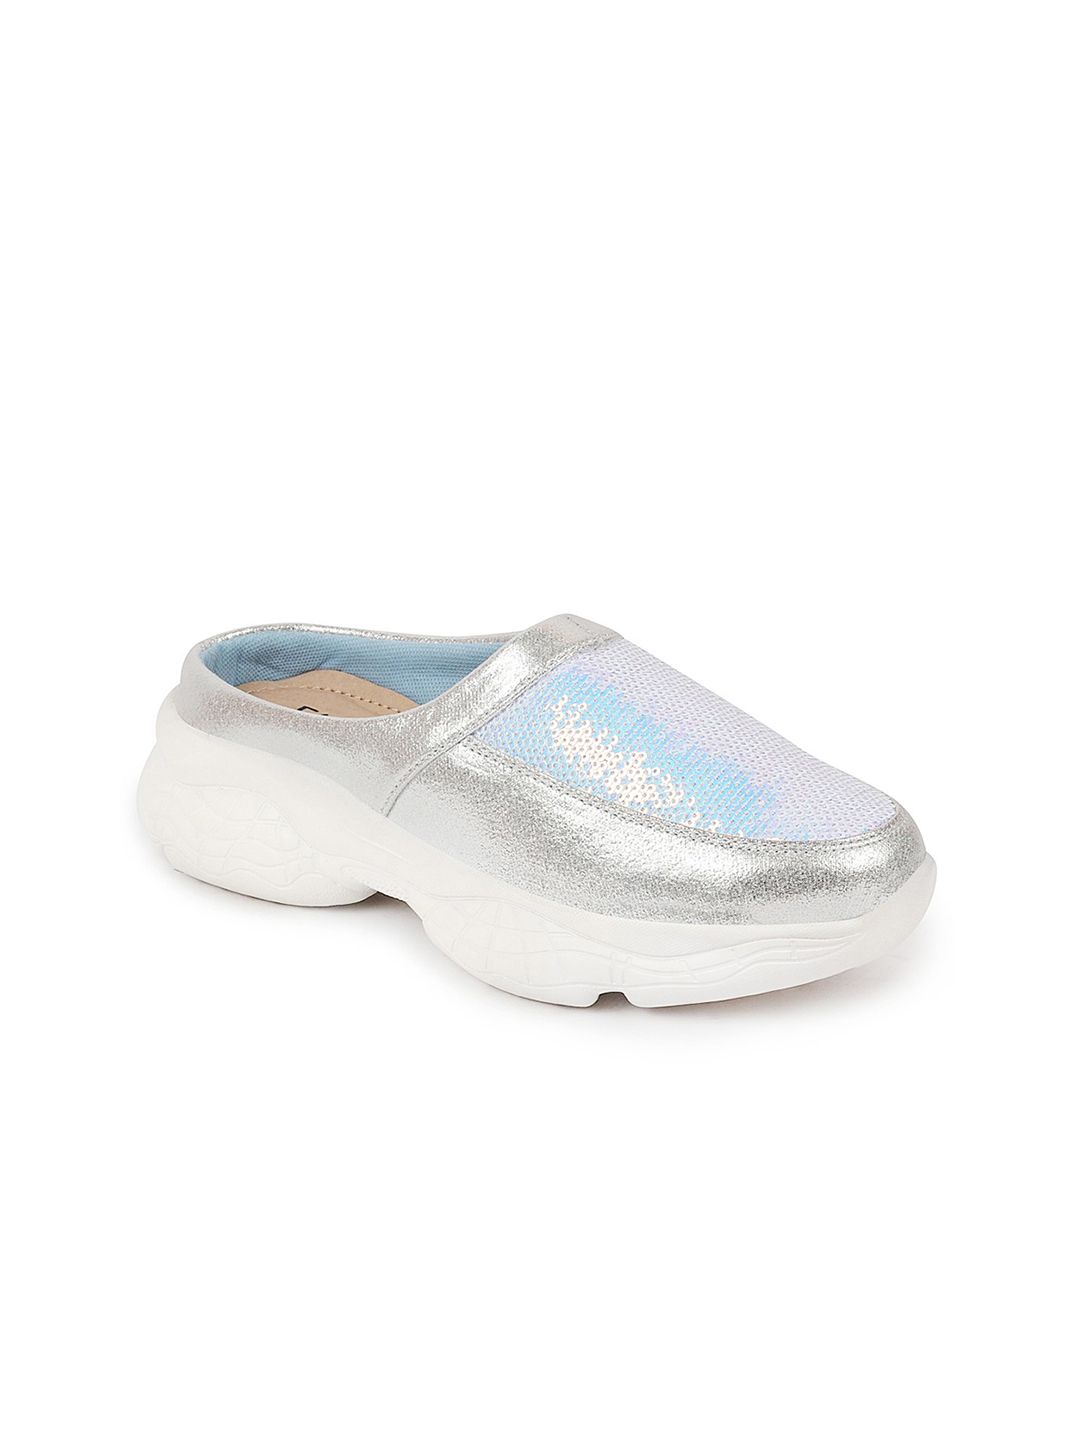 FAUSTO Women's Silver Back Open Embellished Slip On Mules Price in India